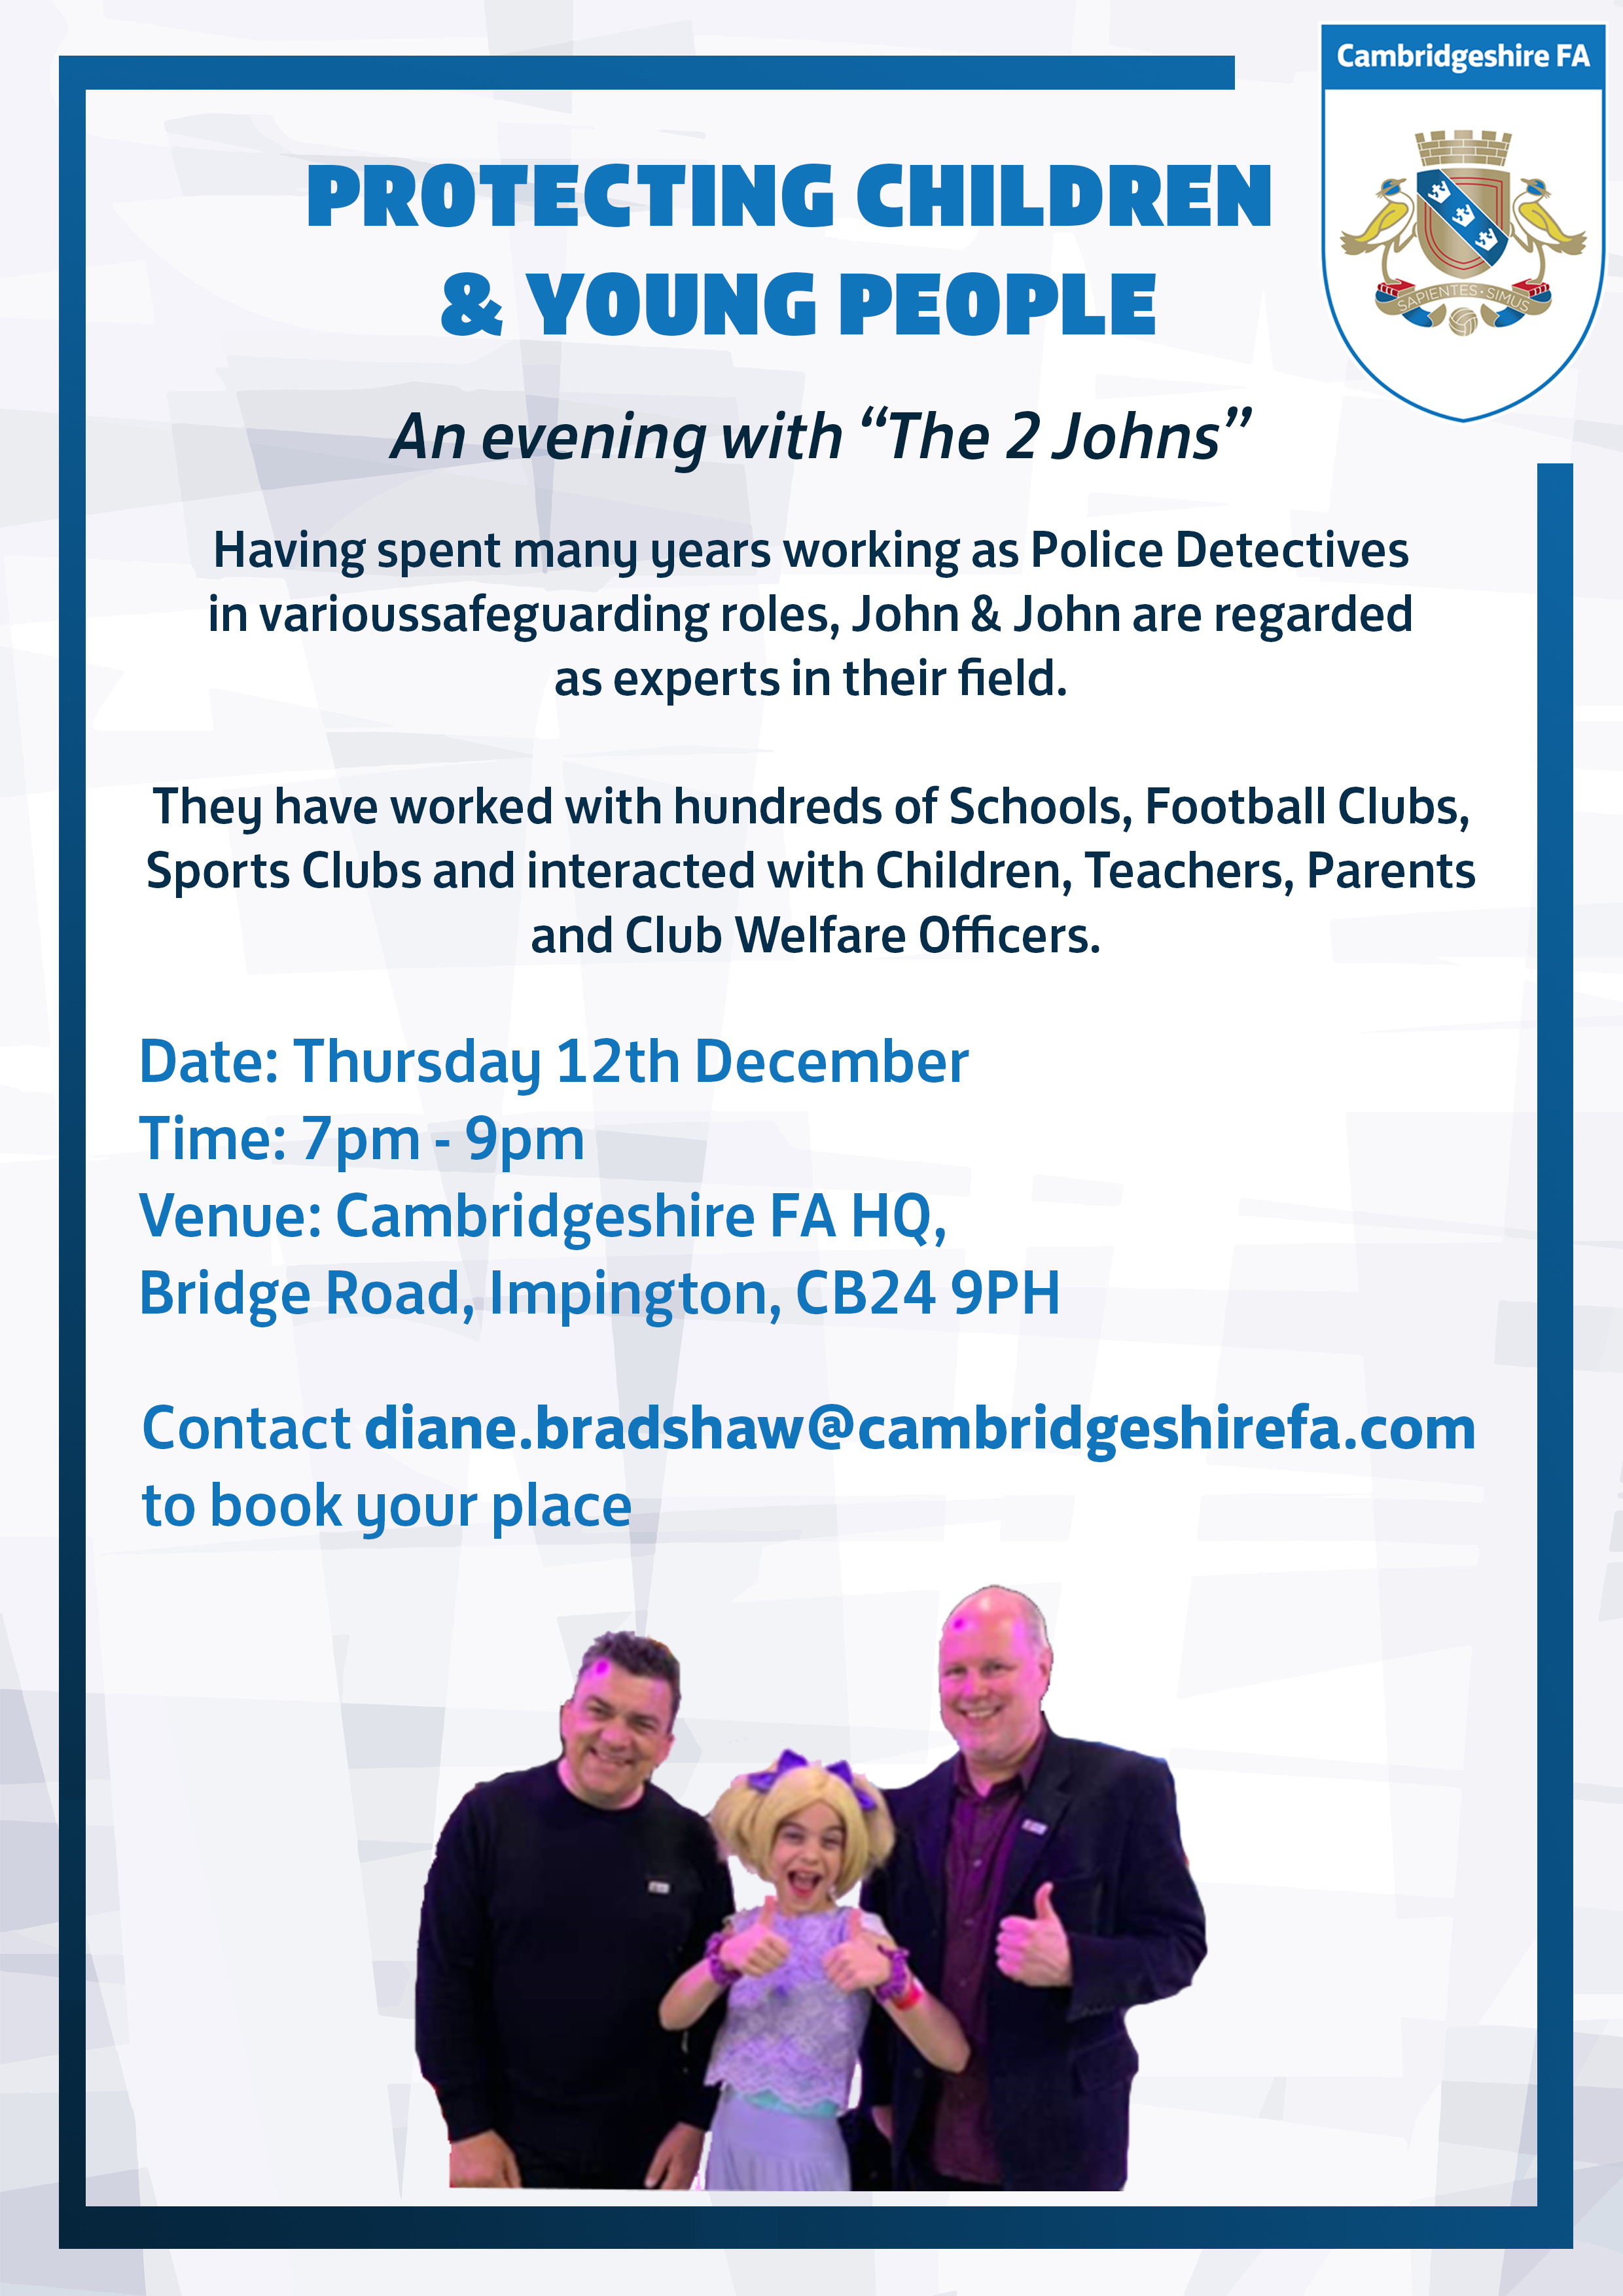 An evening with the 2 johns